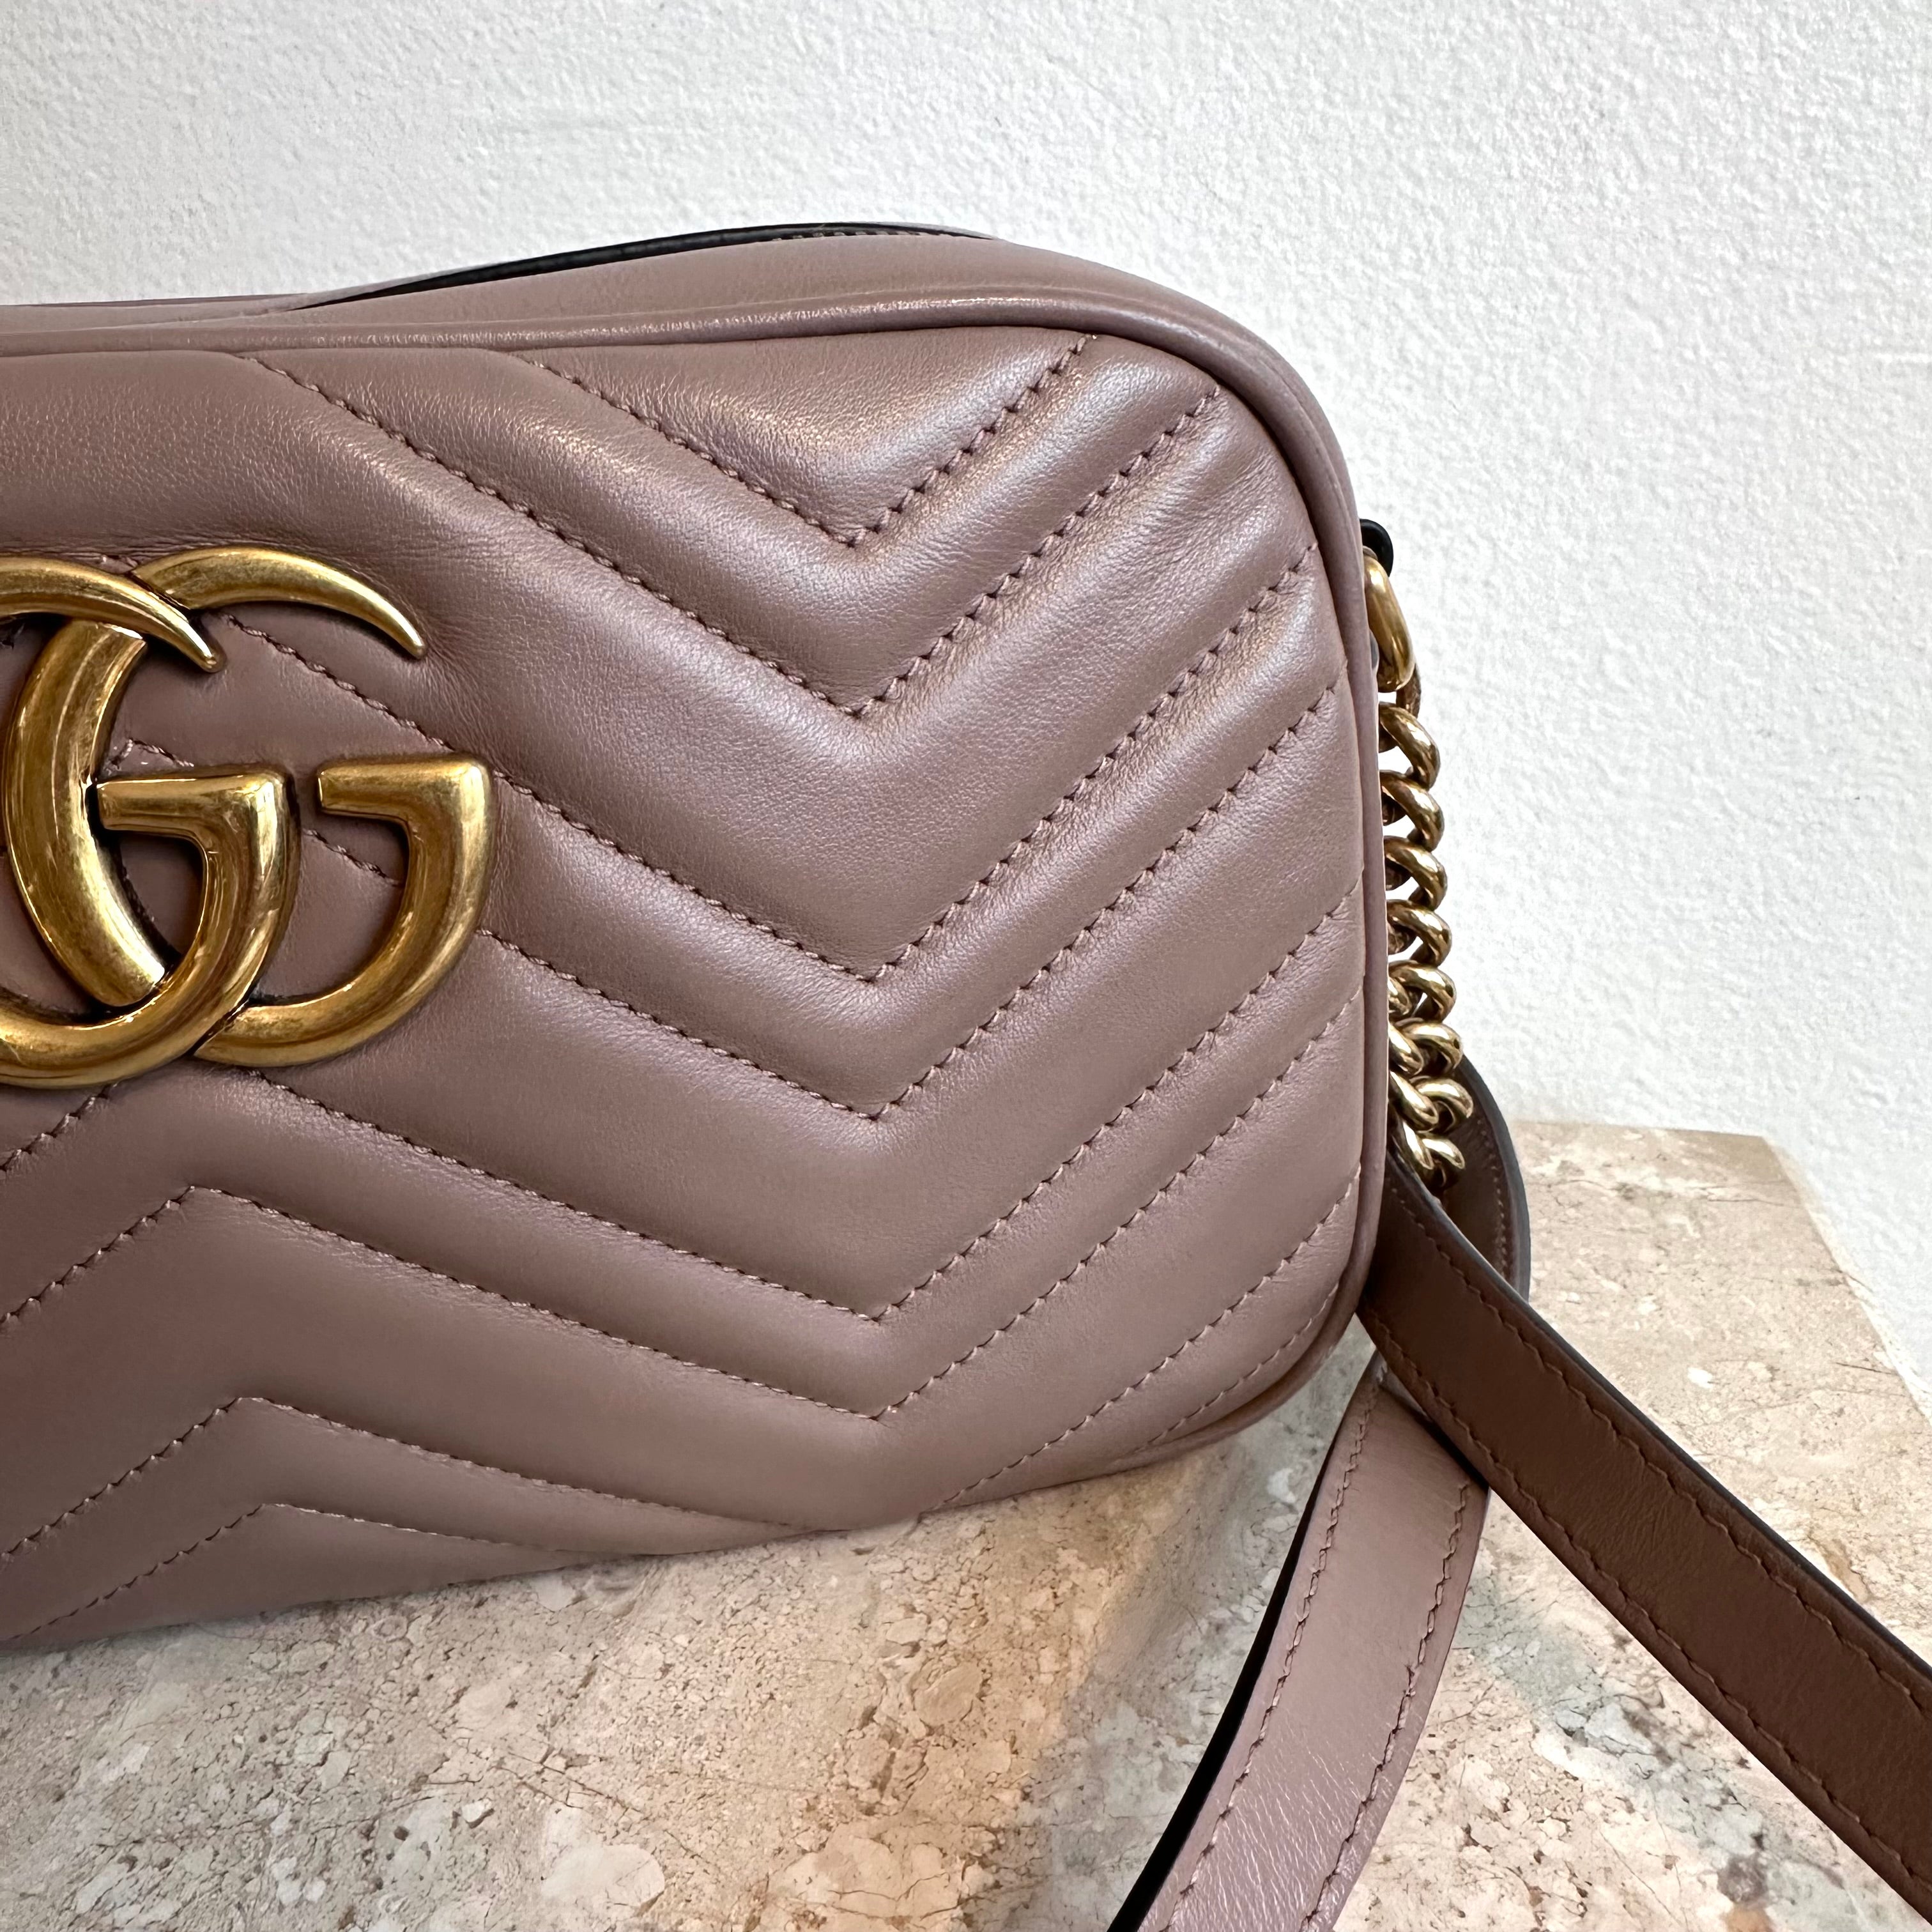 Pre-Owned GUCCI GG Marmont Small Matelasse Shoulder Bag